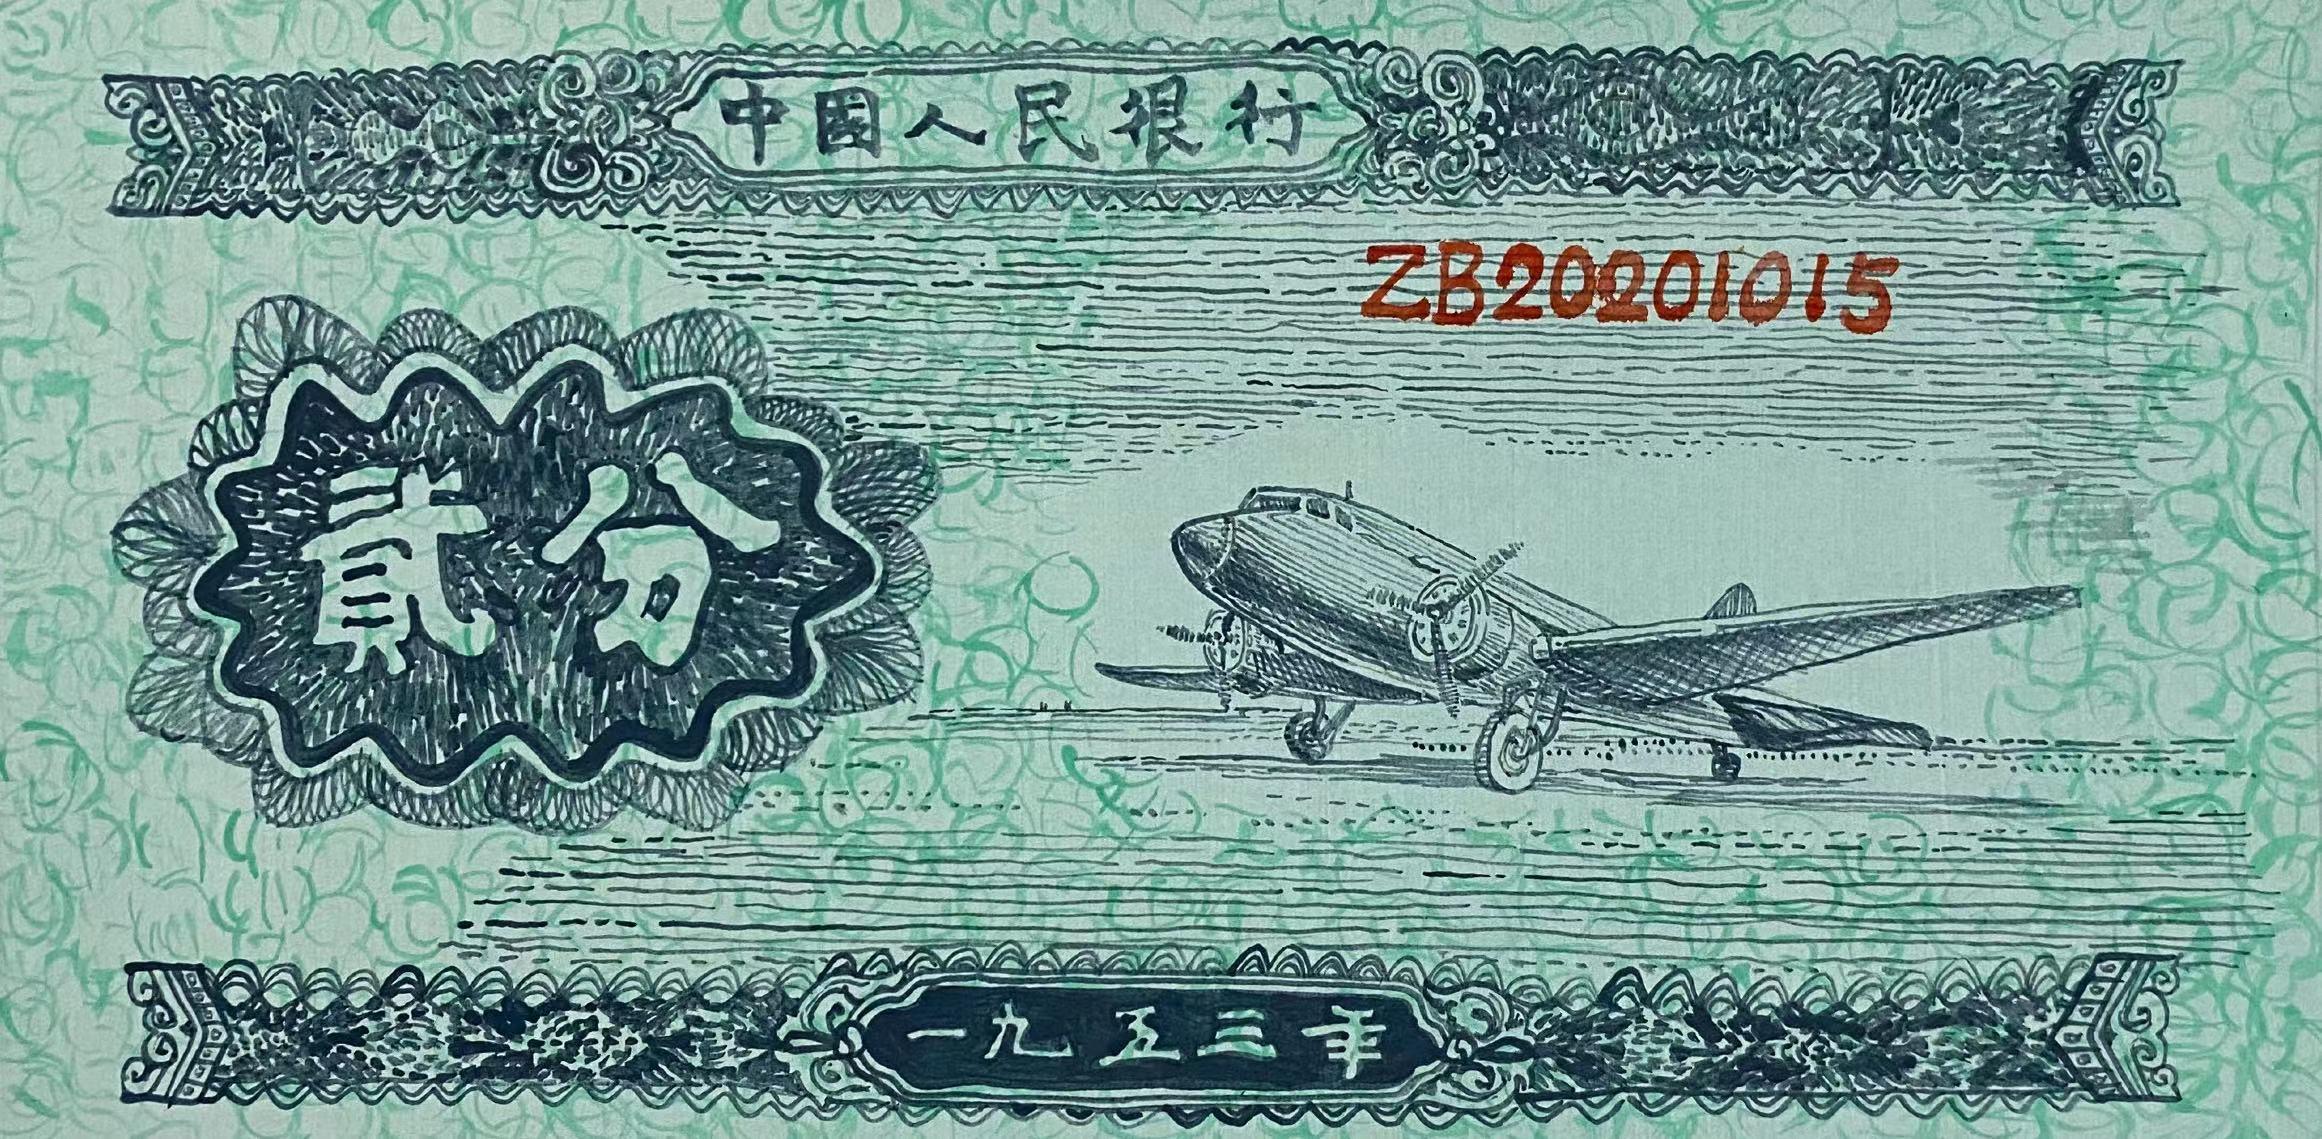 Zhang Bo Still-Life Painting - Old Version RMB Paper Money One Cent Air Craft in 1950s